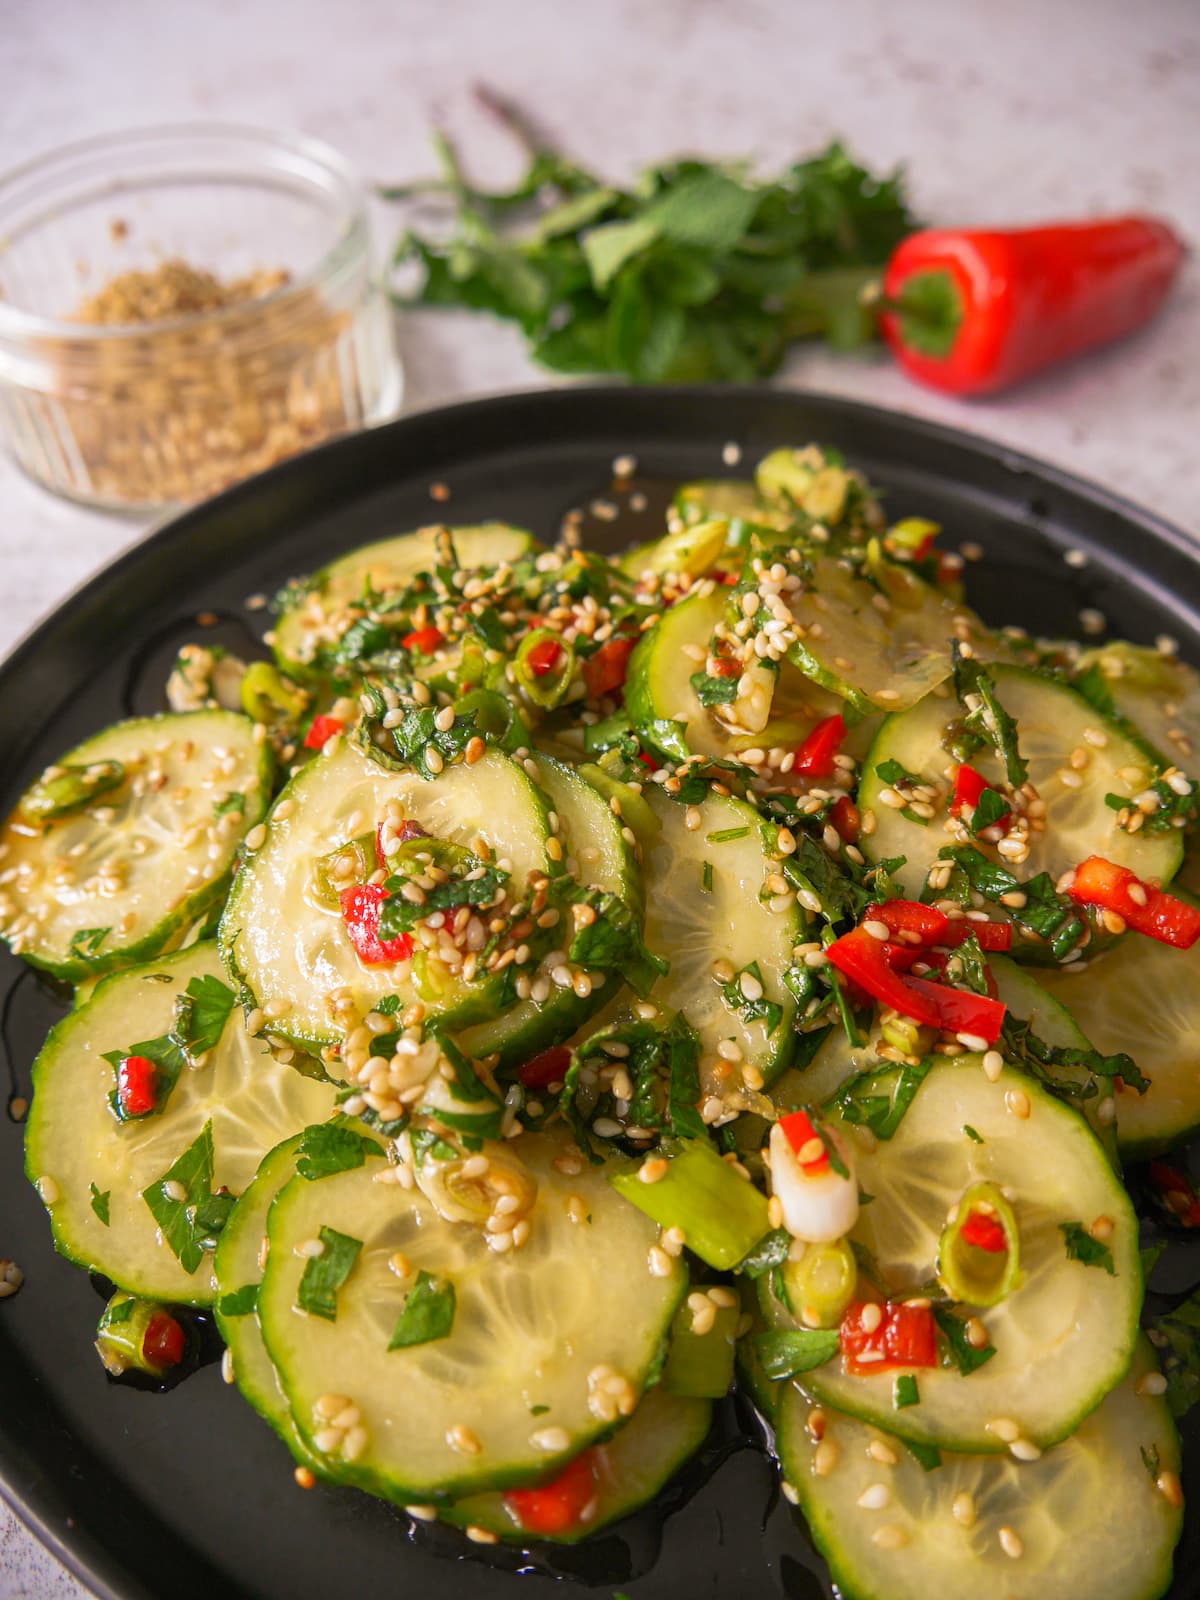 Close up photo of a black plate with sliced cucumbers and topped with diced red chilli, sliced spring onions and toasted sesame seed and coated in salad dressing, with a glass dish filled with toasted sesame seeds, sprigs of fresh herbs and a whole red chilli set alongside.